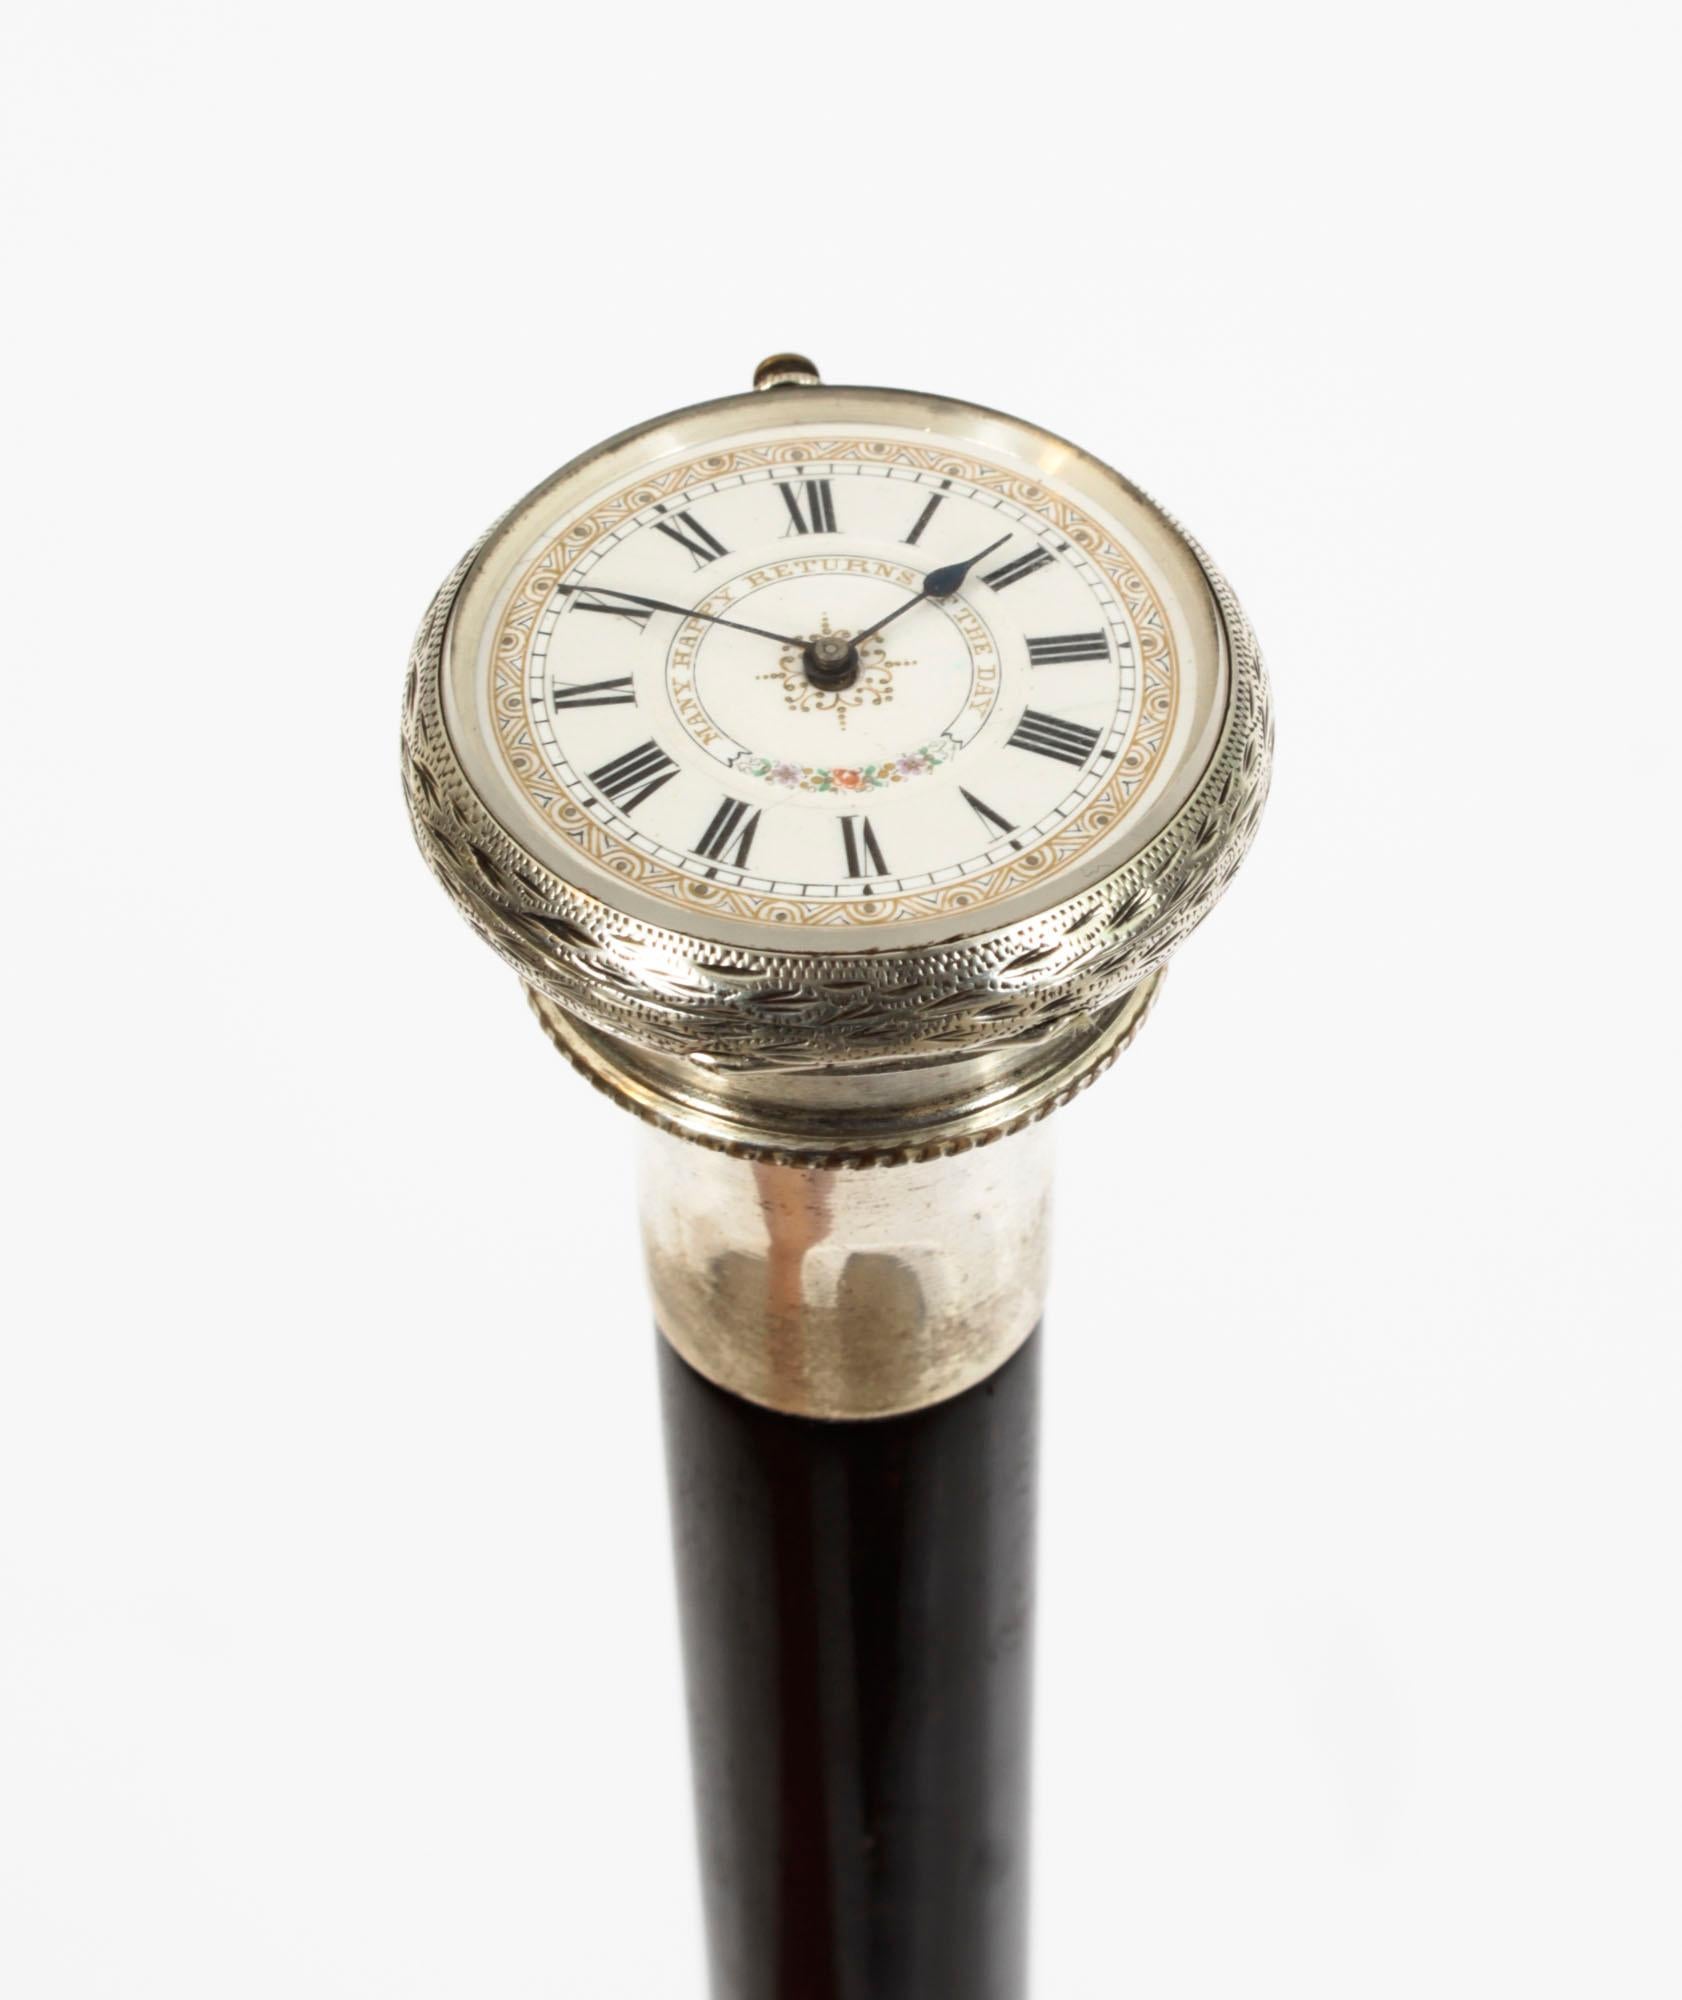 This is a beautiful and distinctive antique English Gentlemans ebonised gadget walking stick  watch with an exquisite silver watch fashioned into the handle and bearing hallmarks for Birmingham 1884.

The watch having a decorative silvered dial and